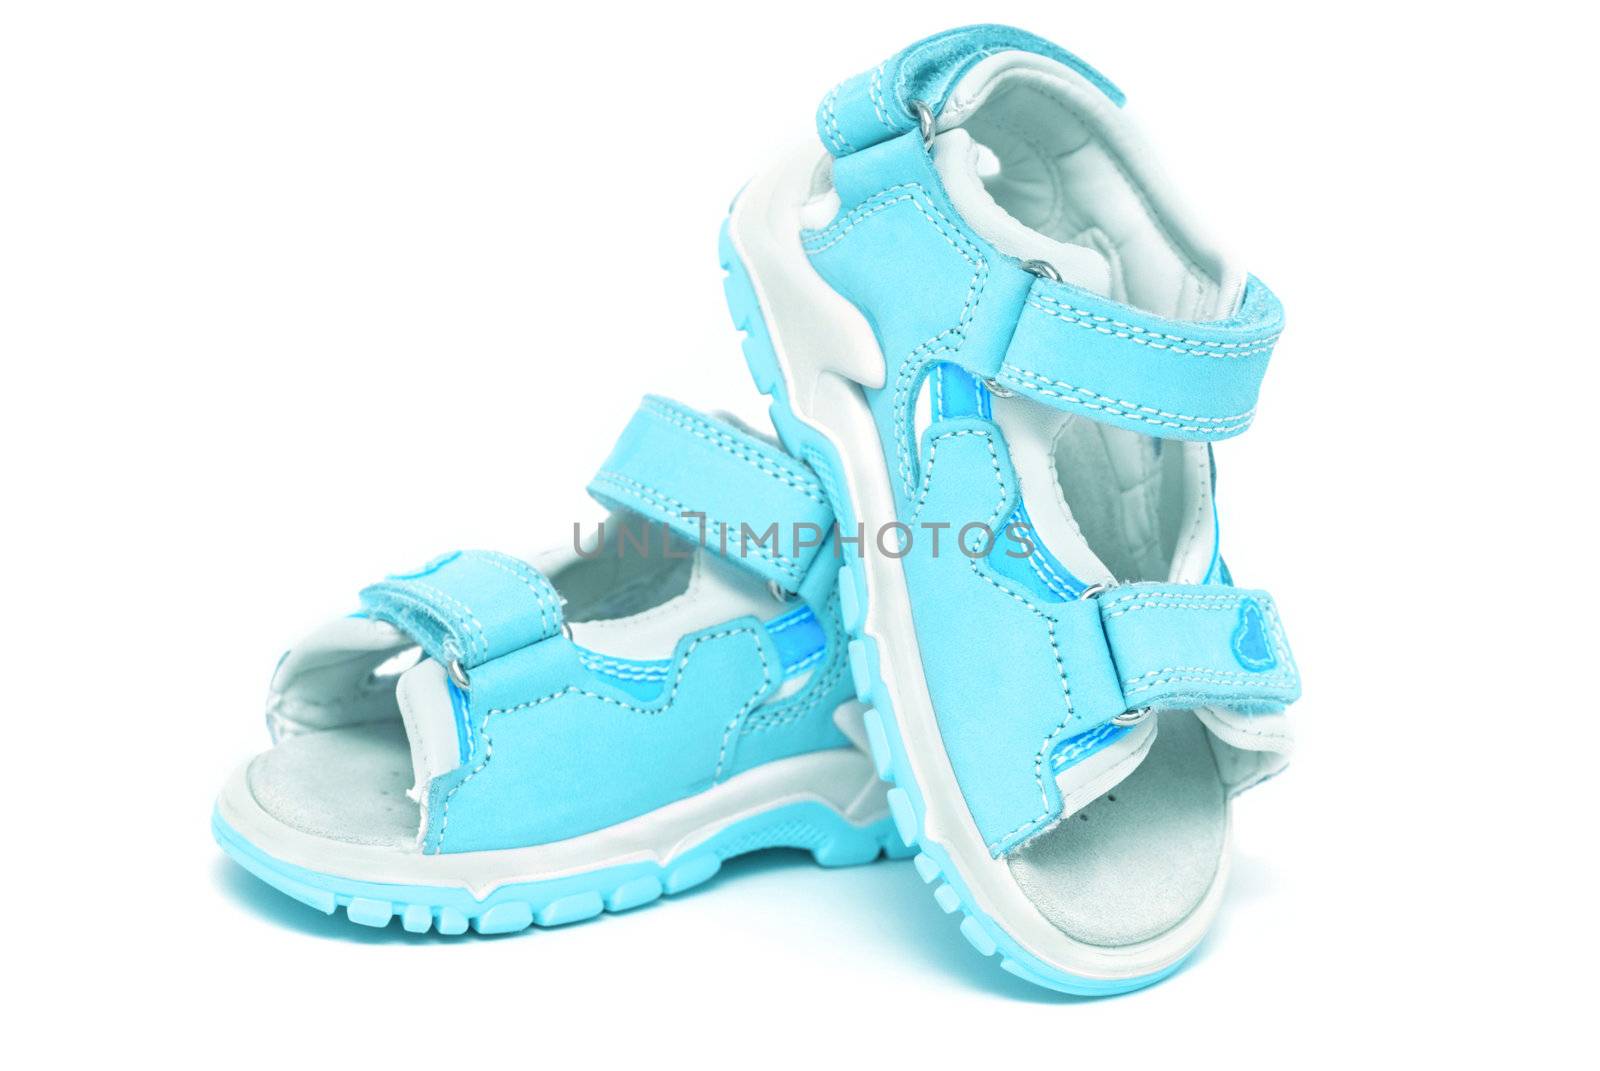 Blue child's sandals isolated on white